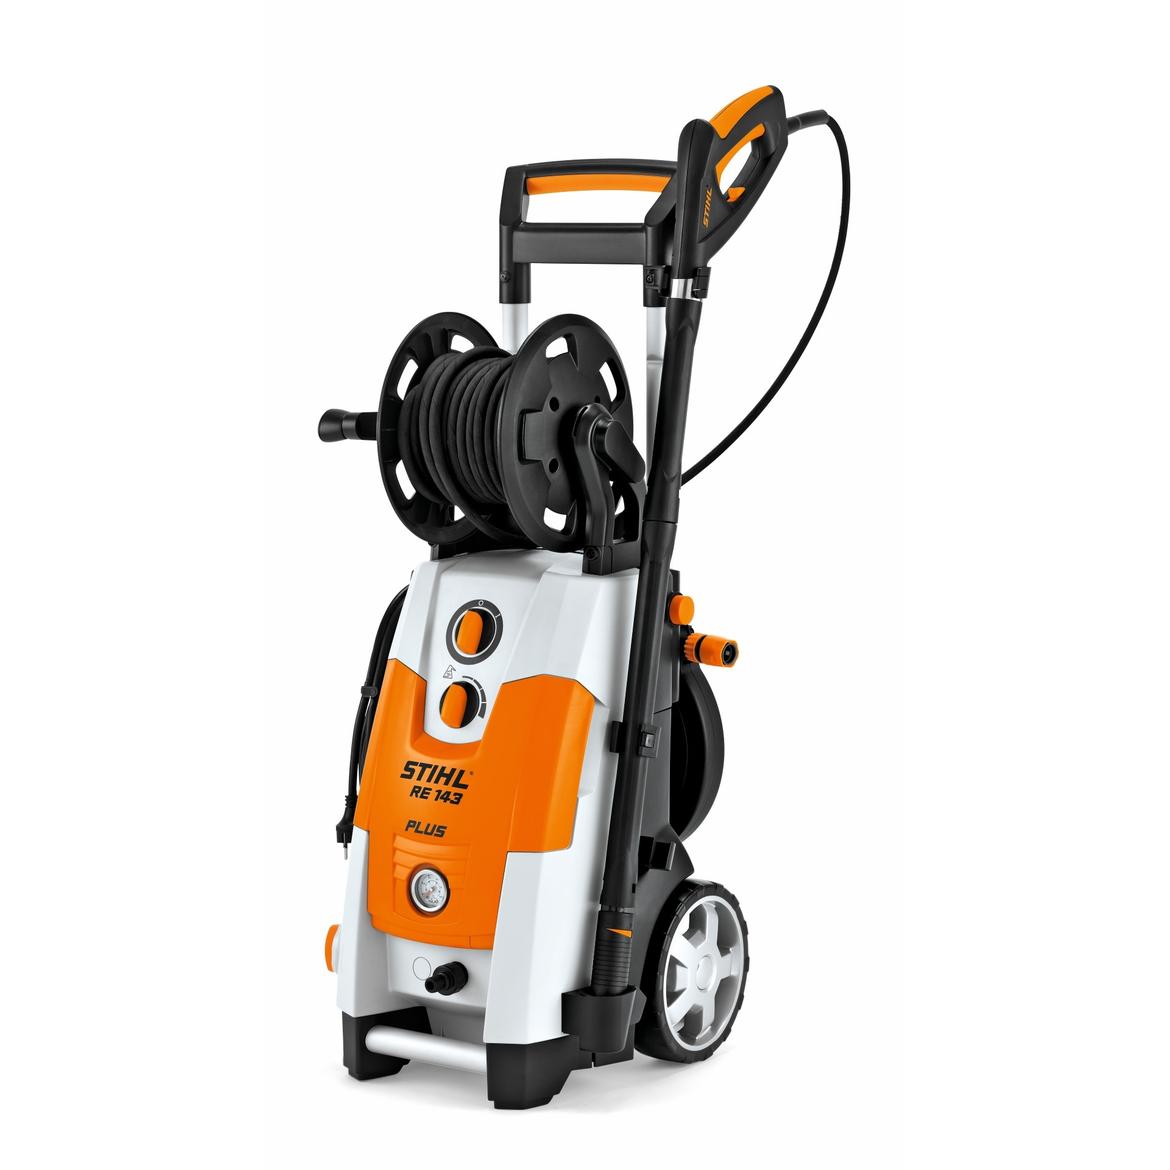 Stihl Electric Pressure Washer At Power Equipment 